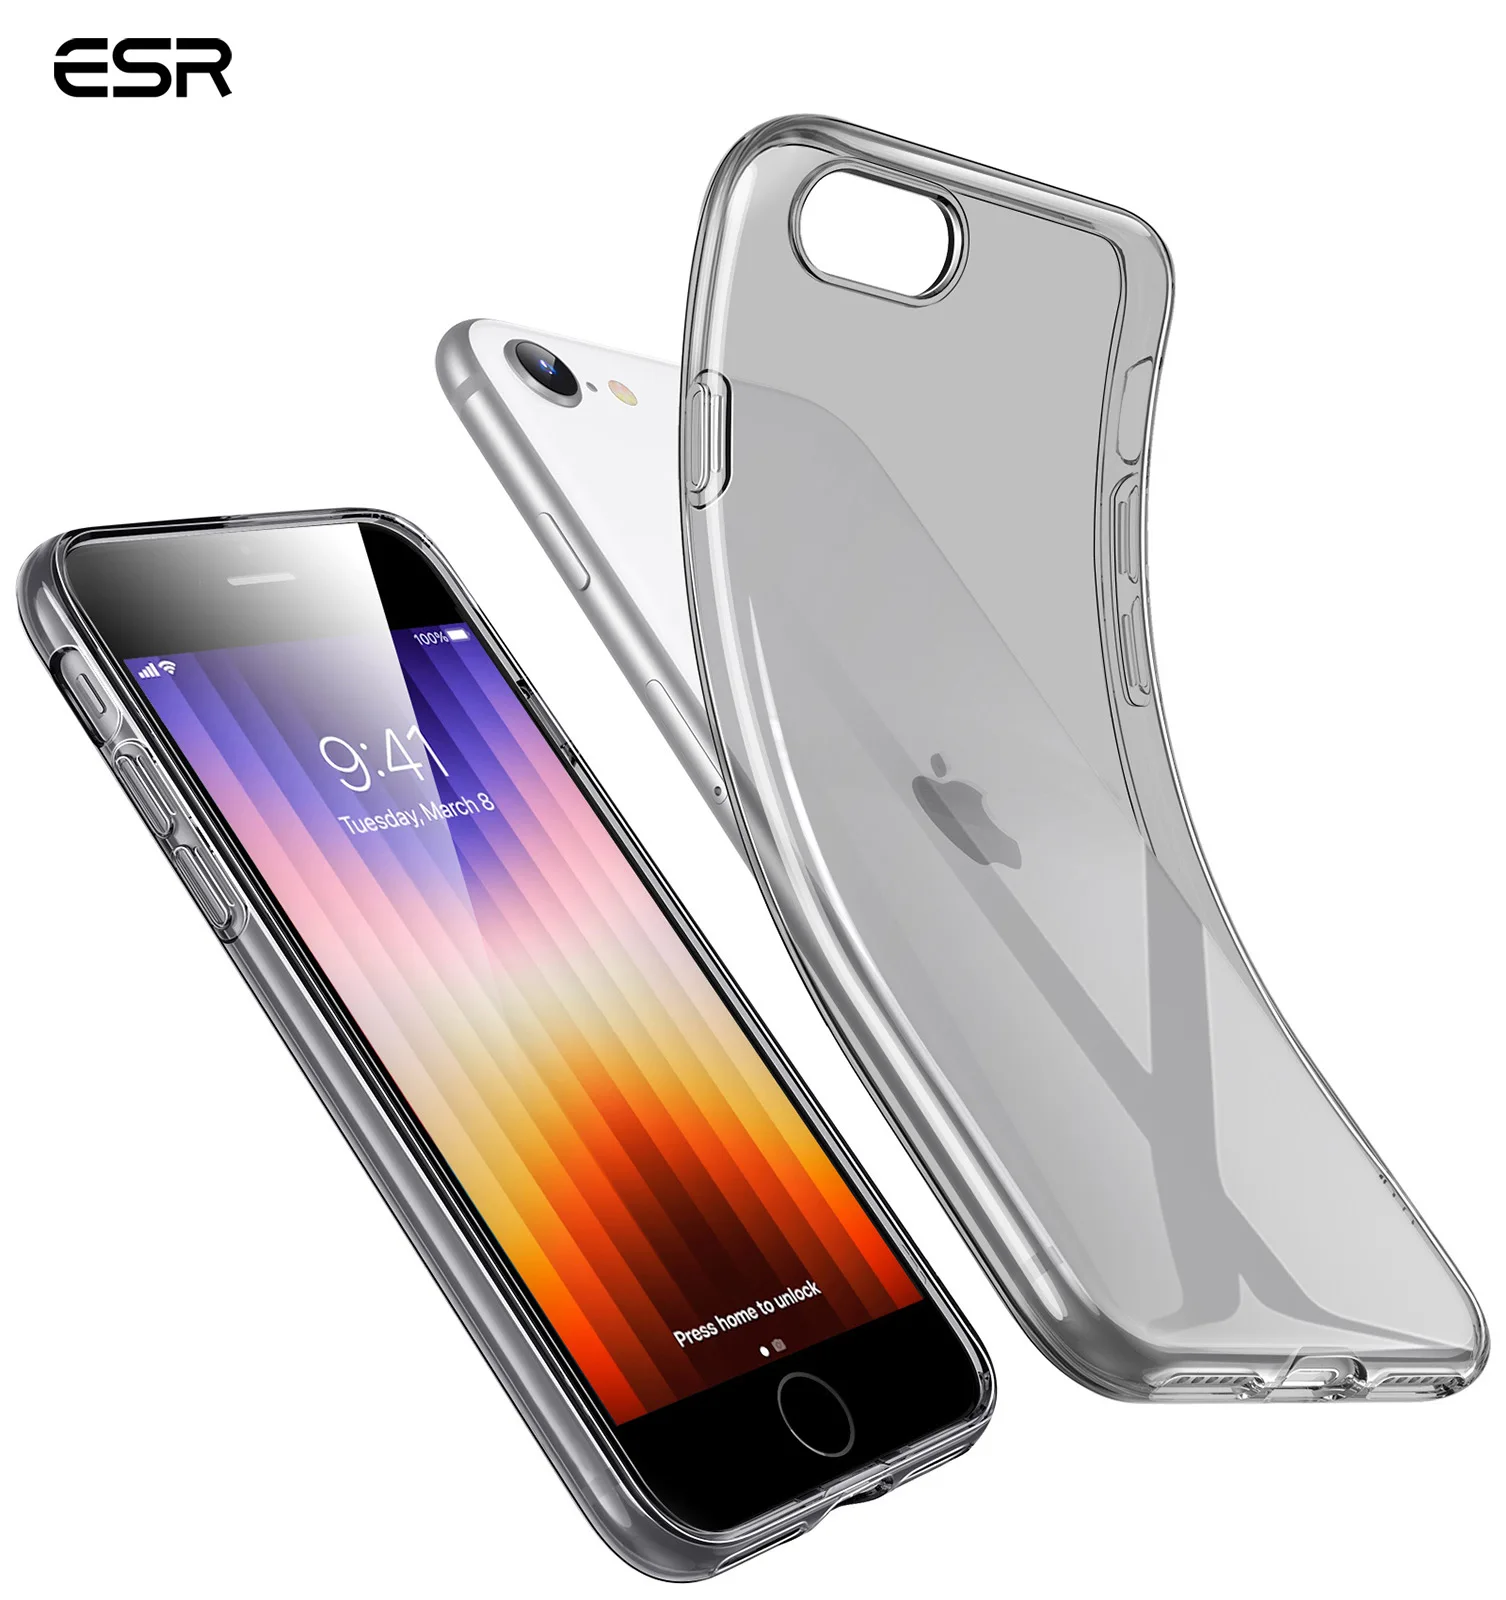 ESR for iPhone SE 2022 Case Clear Crystal Cover for iPhone SE 3rd Gen for iPhone SE 2020 TPU Protective Back Case for iPhone 8 7 mobile pouch waterproof